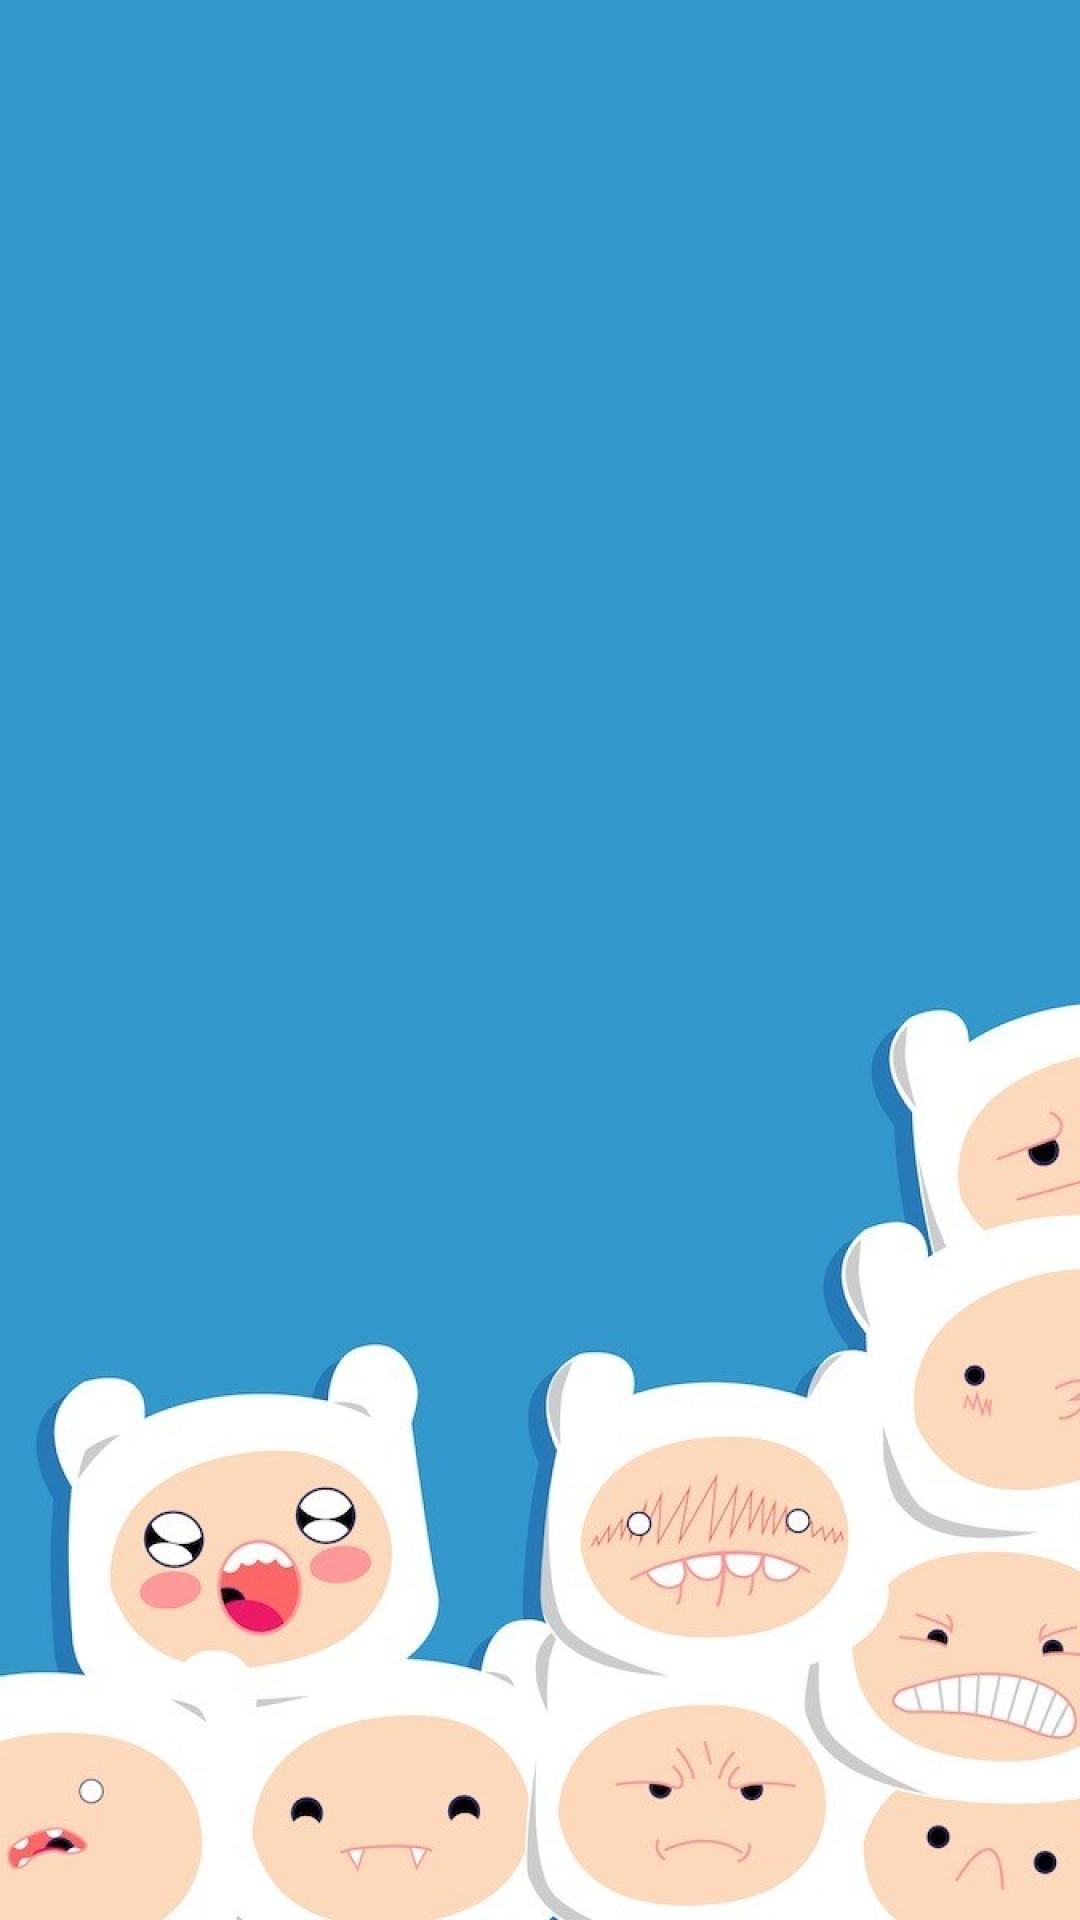 Free Download Adventure Time Iphone Backgrounds 